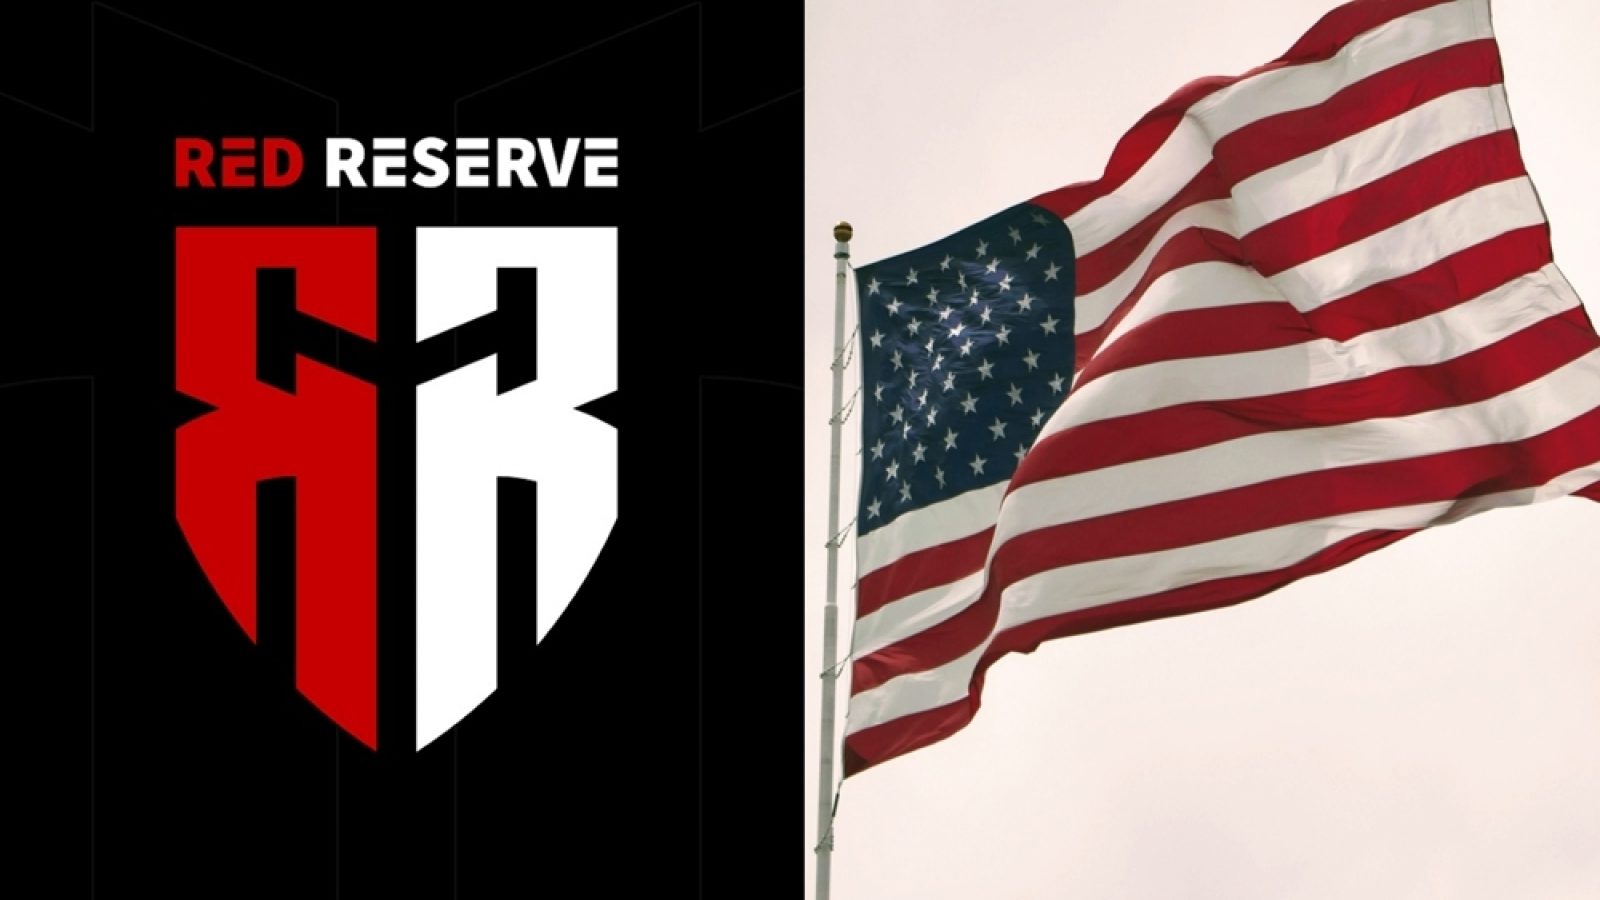 Red Reserve's Call of Duty team announce new location in United States Dexerto